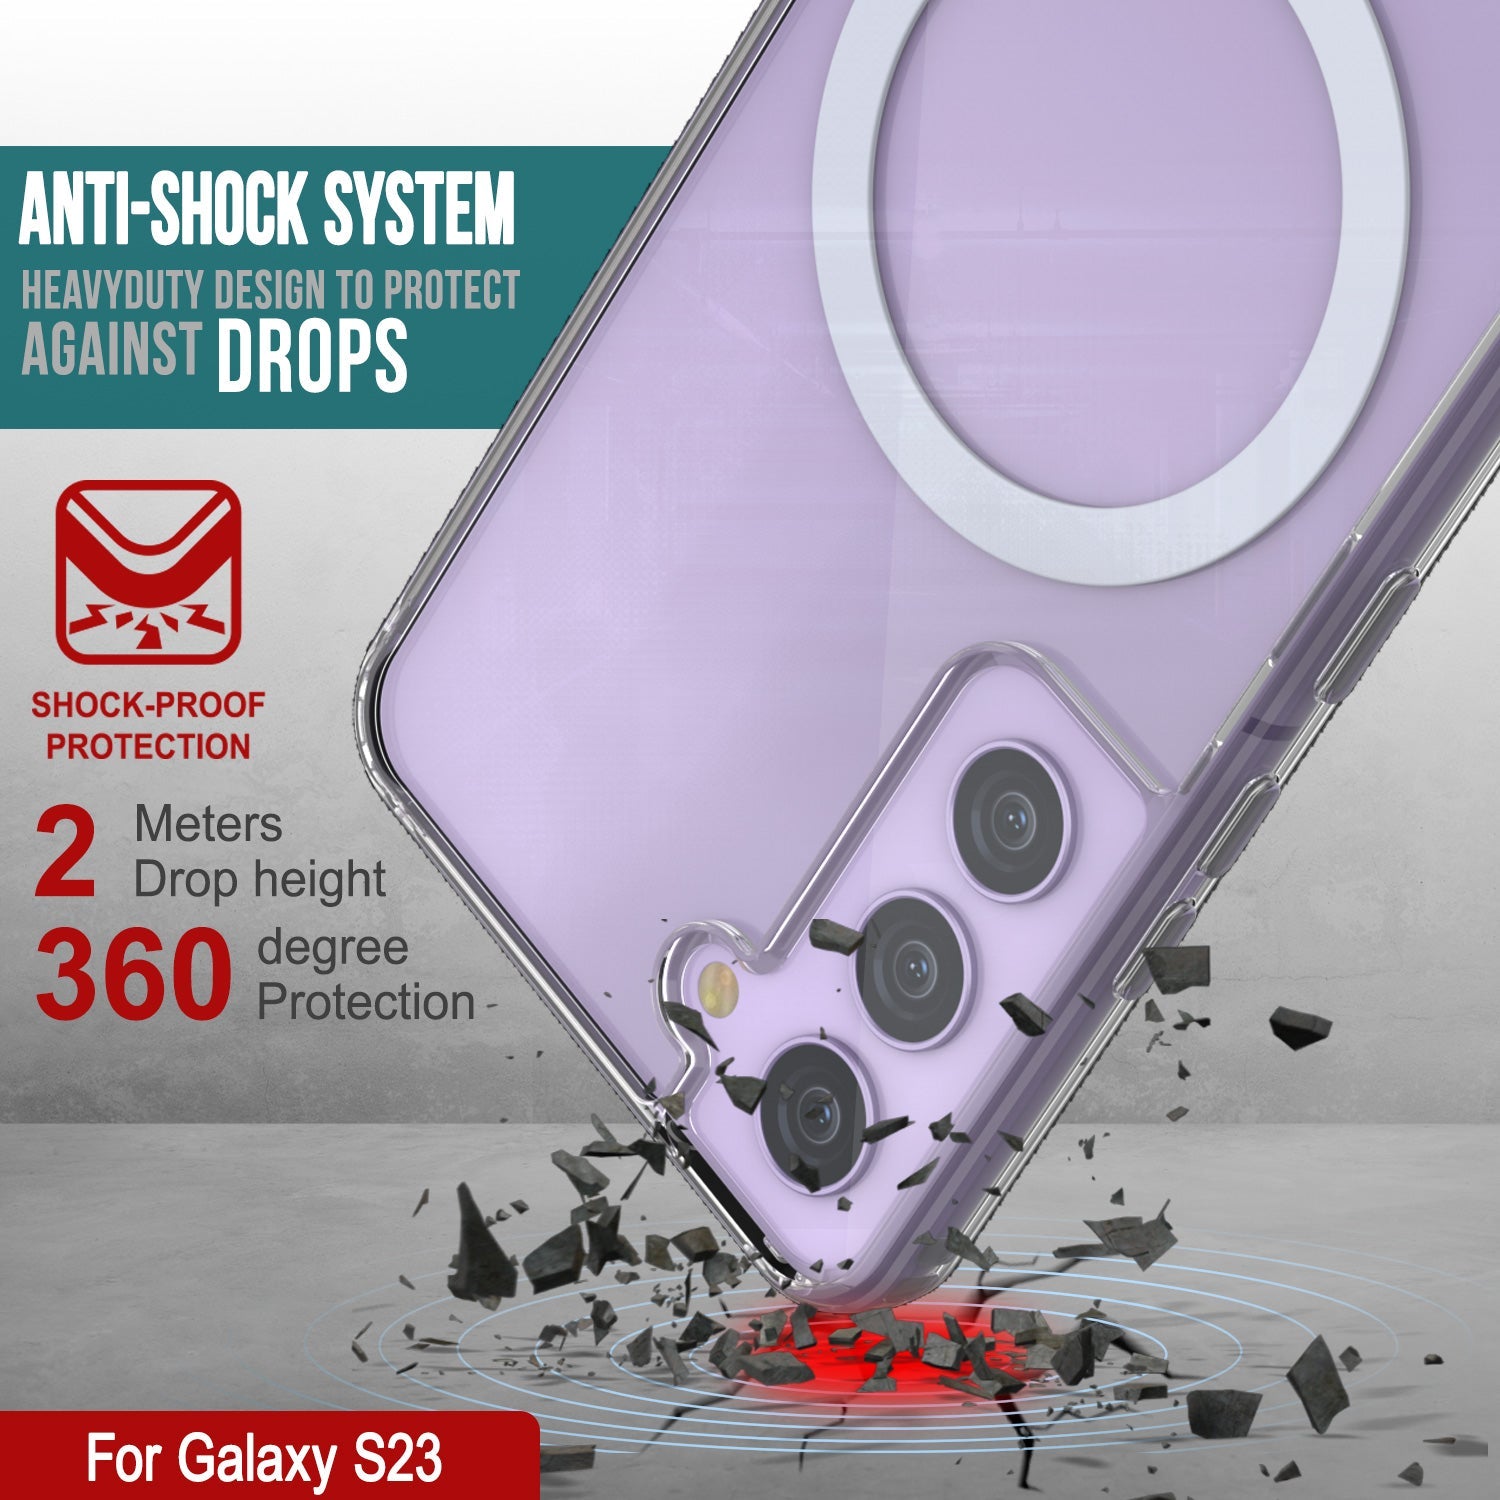 Punkcase Galaxy S23 Magnetic Wireless Charging Case [ClearMag Series]